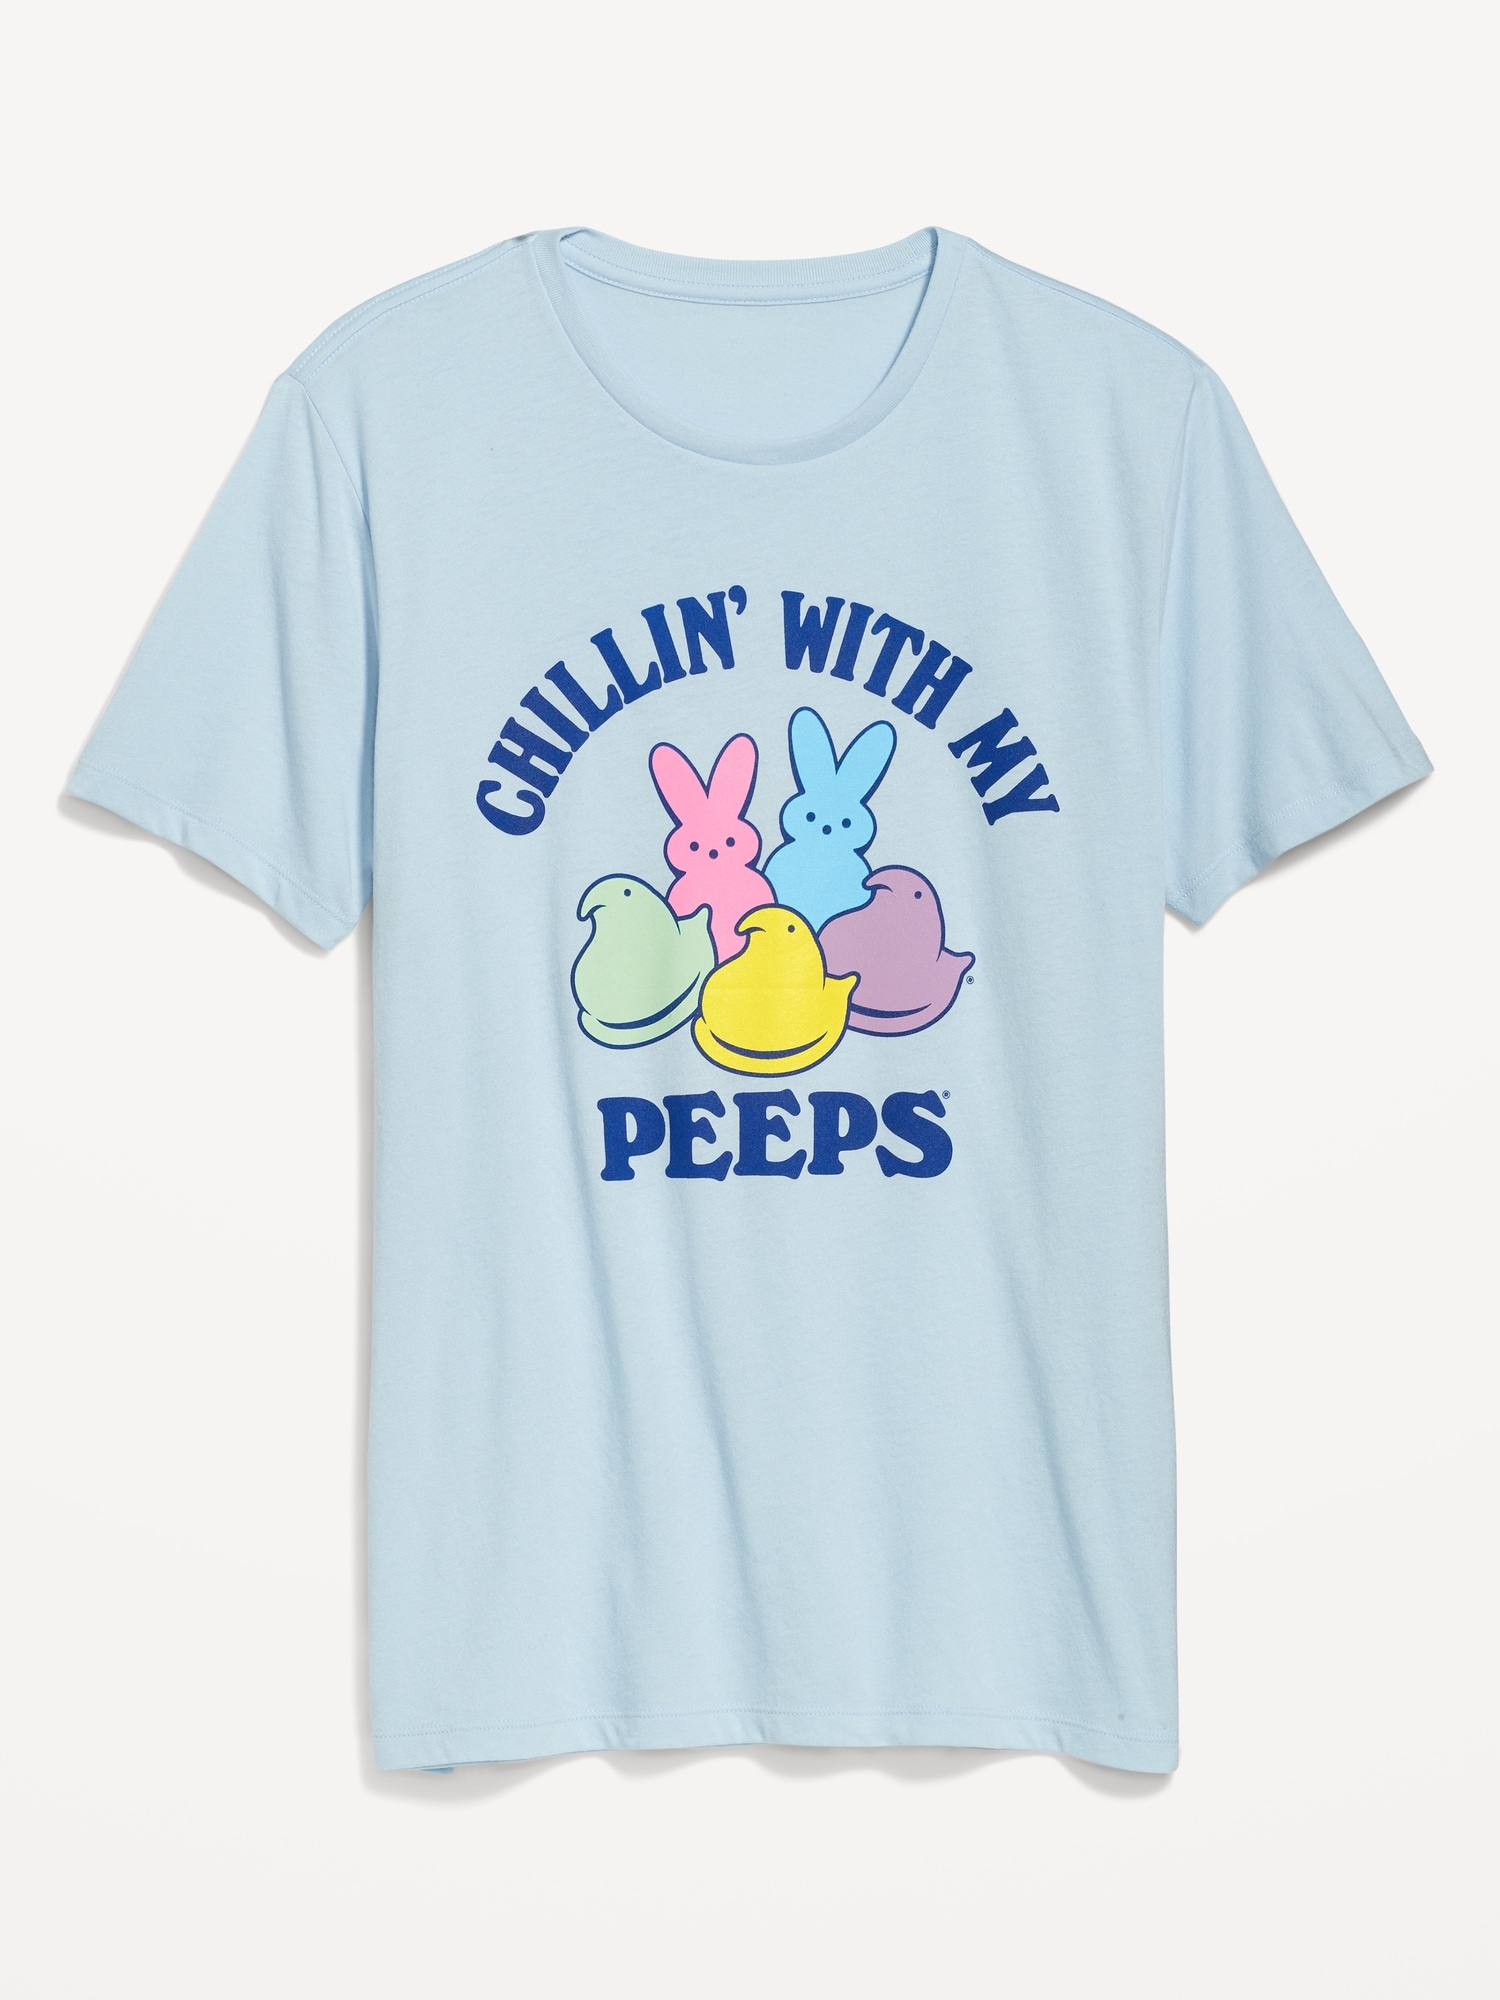 Gender Neutral Matching Graphic T Shirt For Adults Old Navy